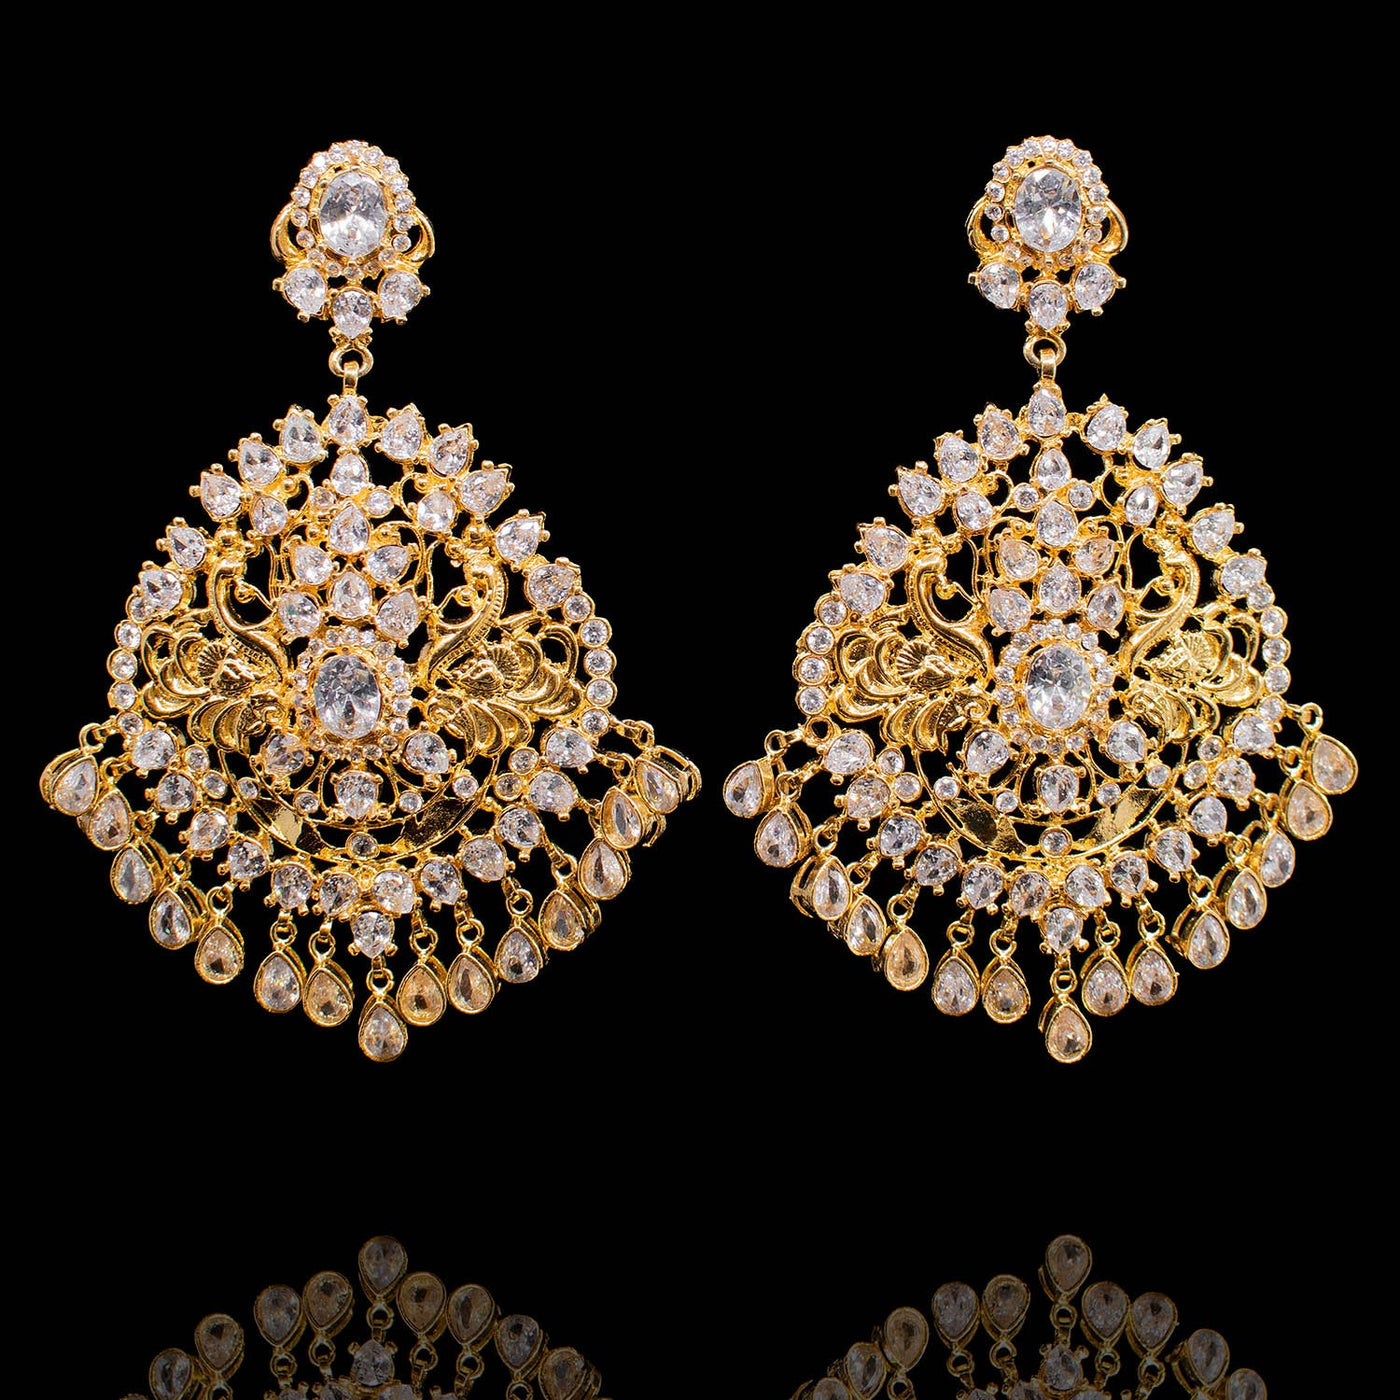 Ruhya Earrings - Available in 2 Options